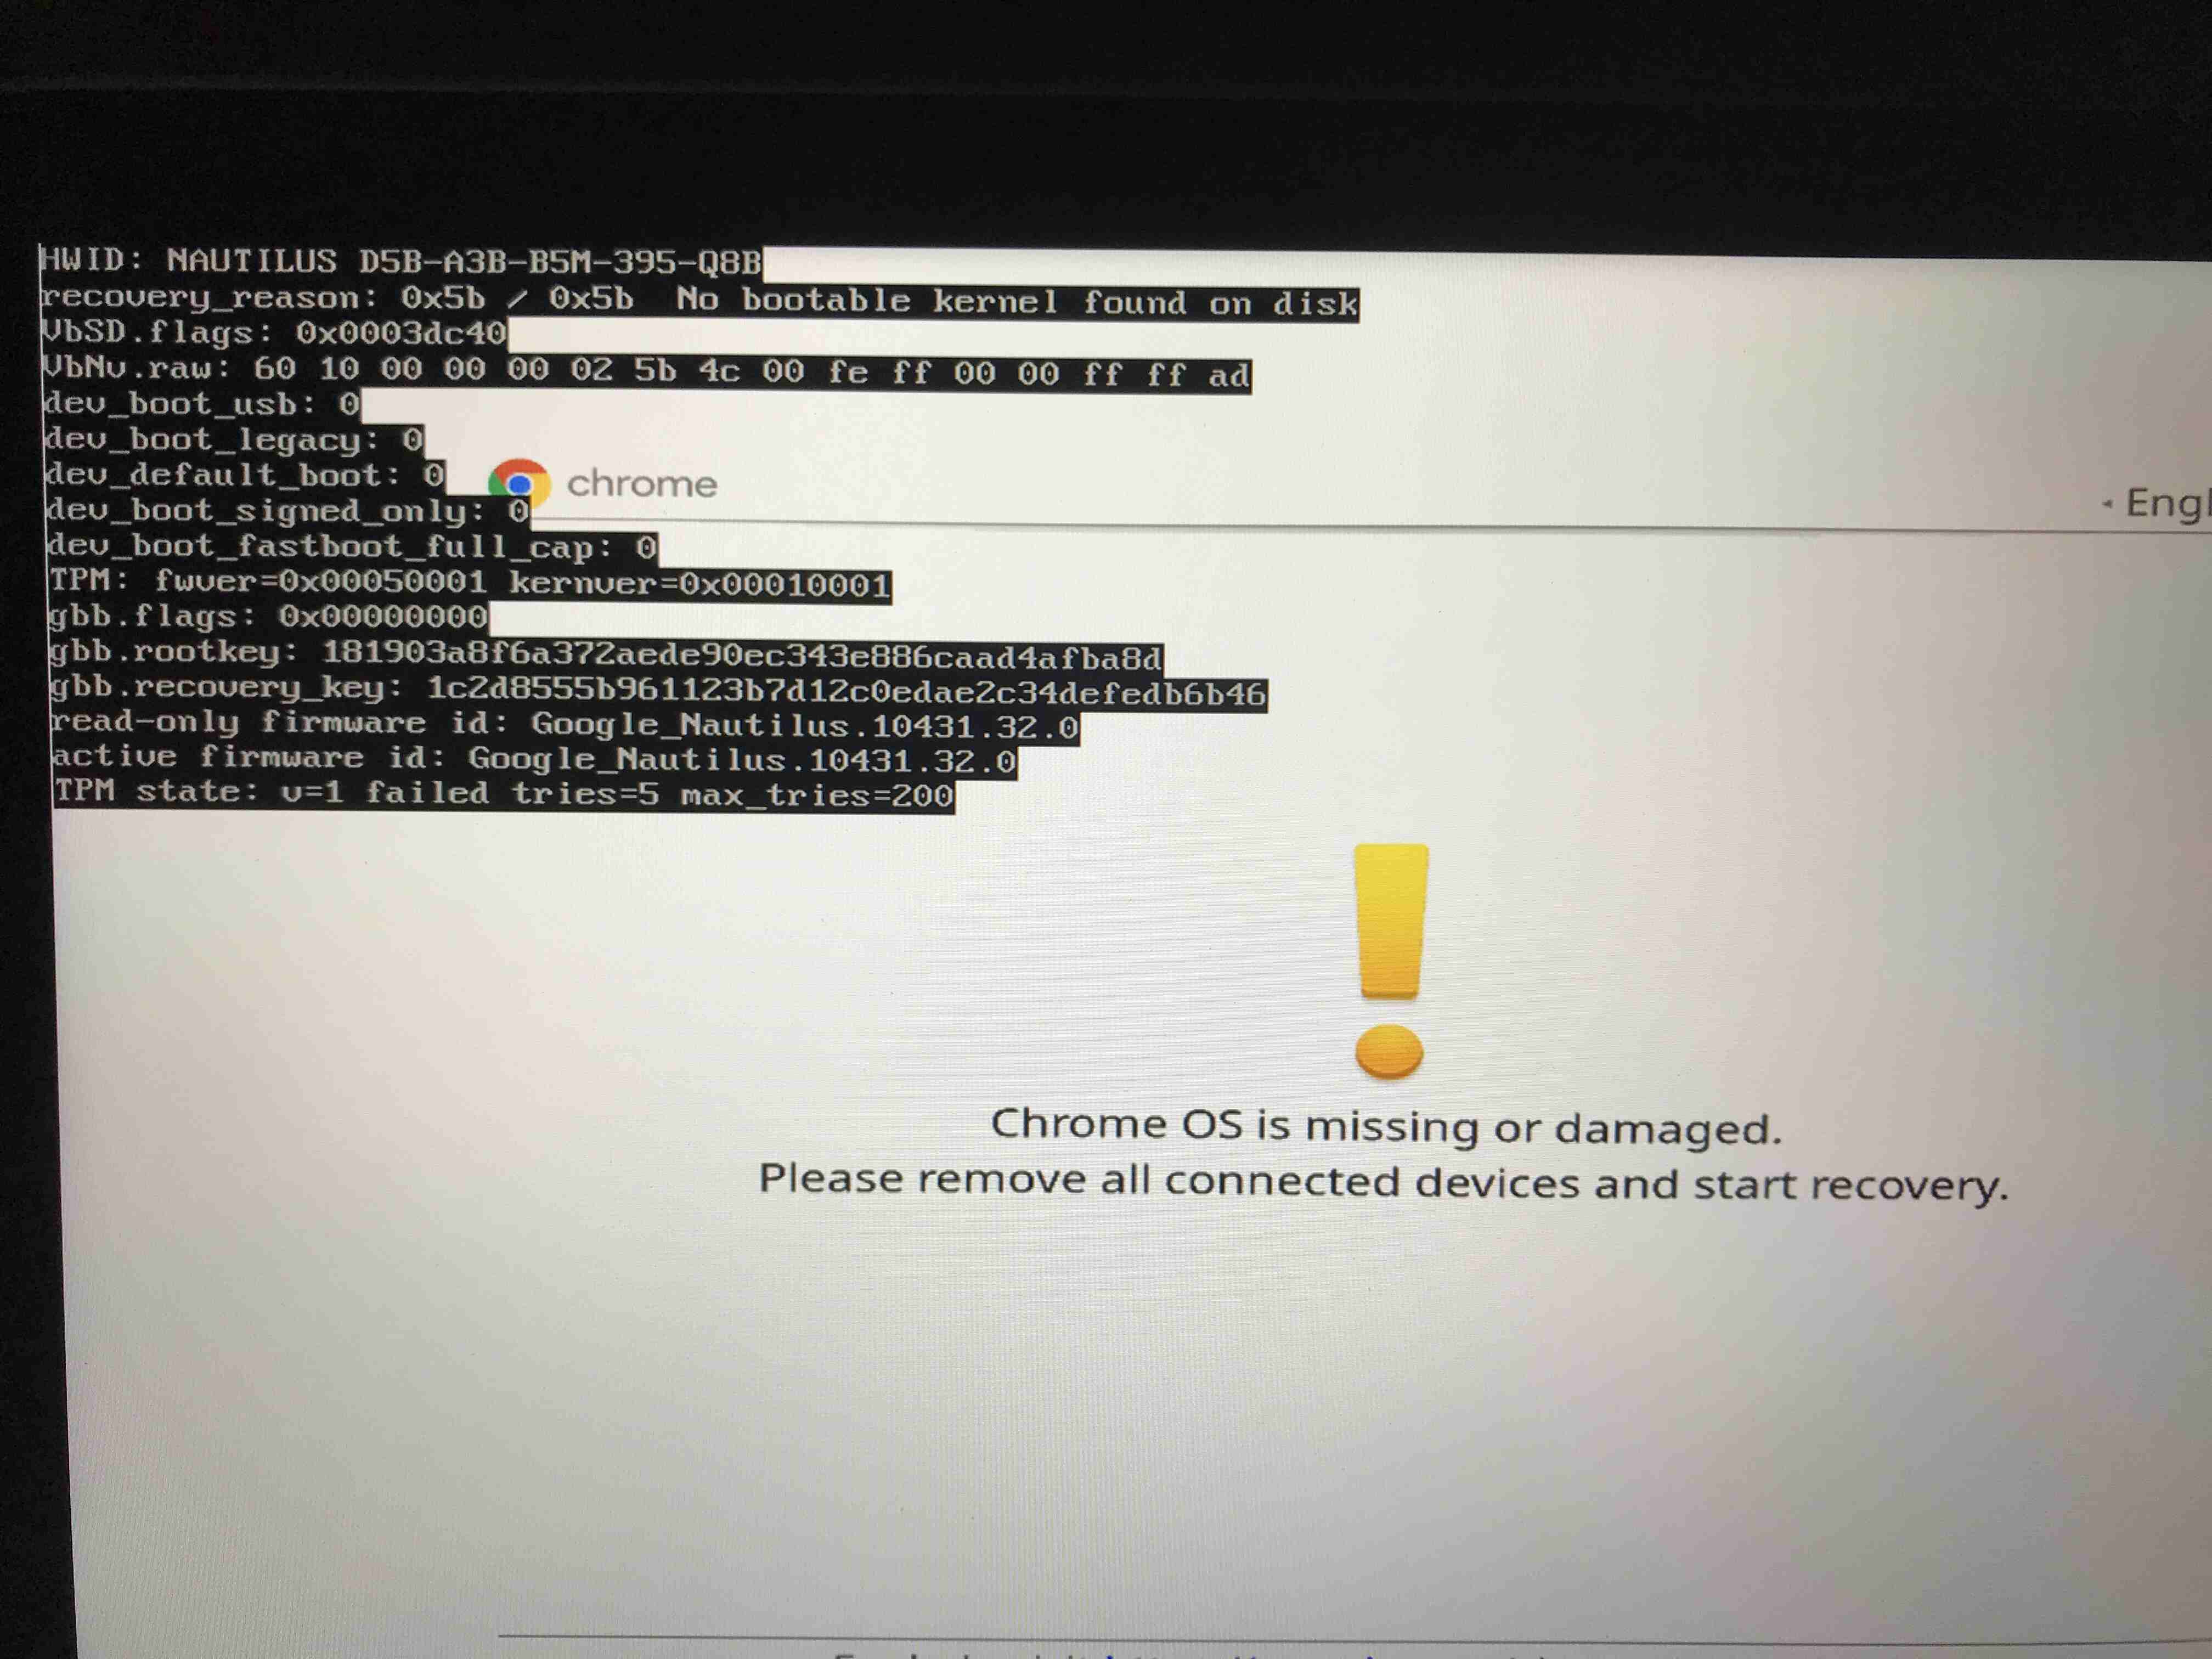 chrome-os-is-missing-or-damaged-how-to-fix-this-error